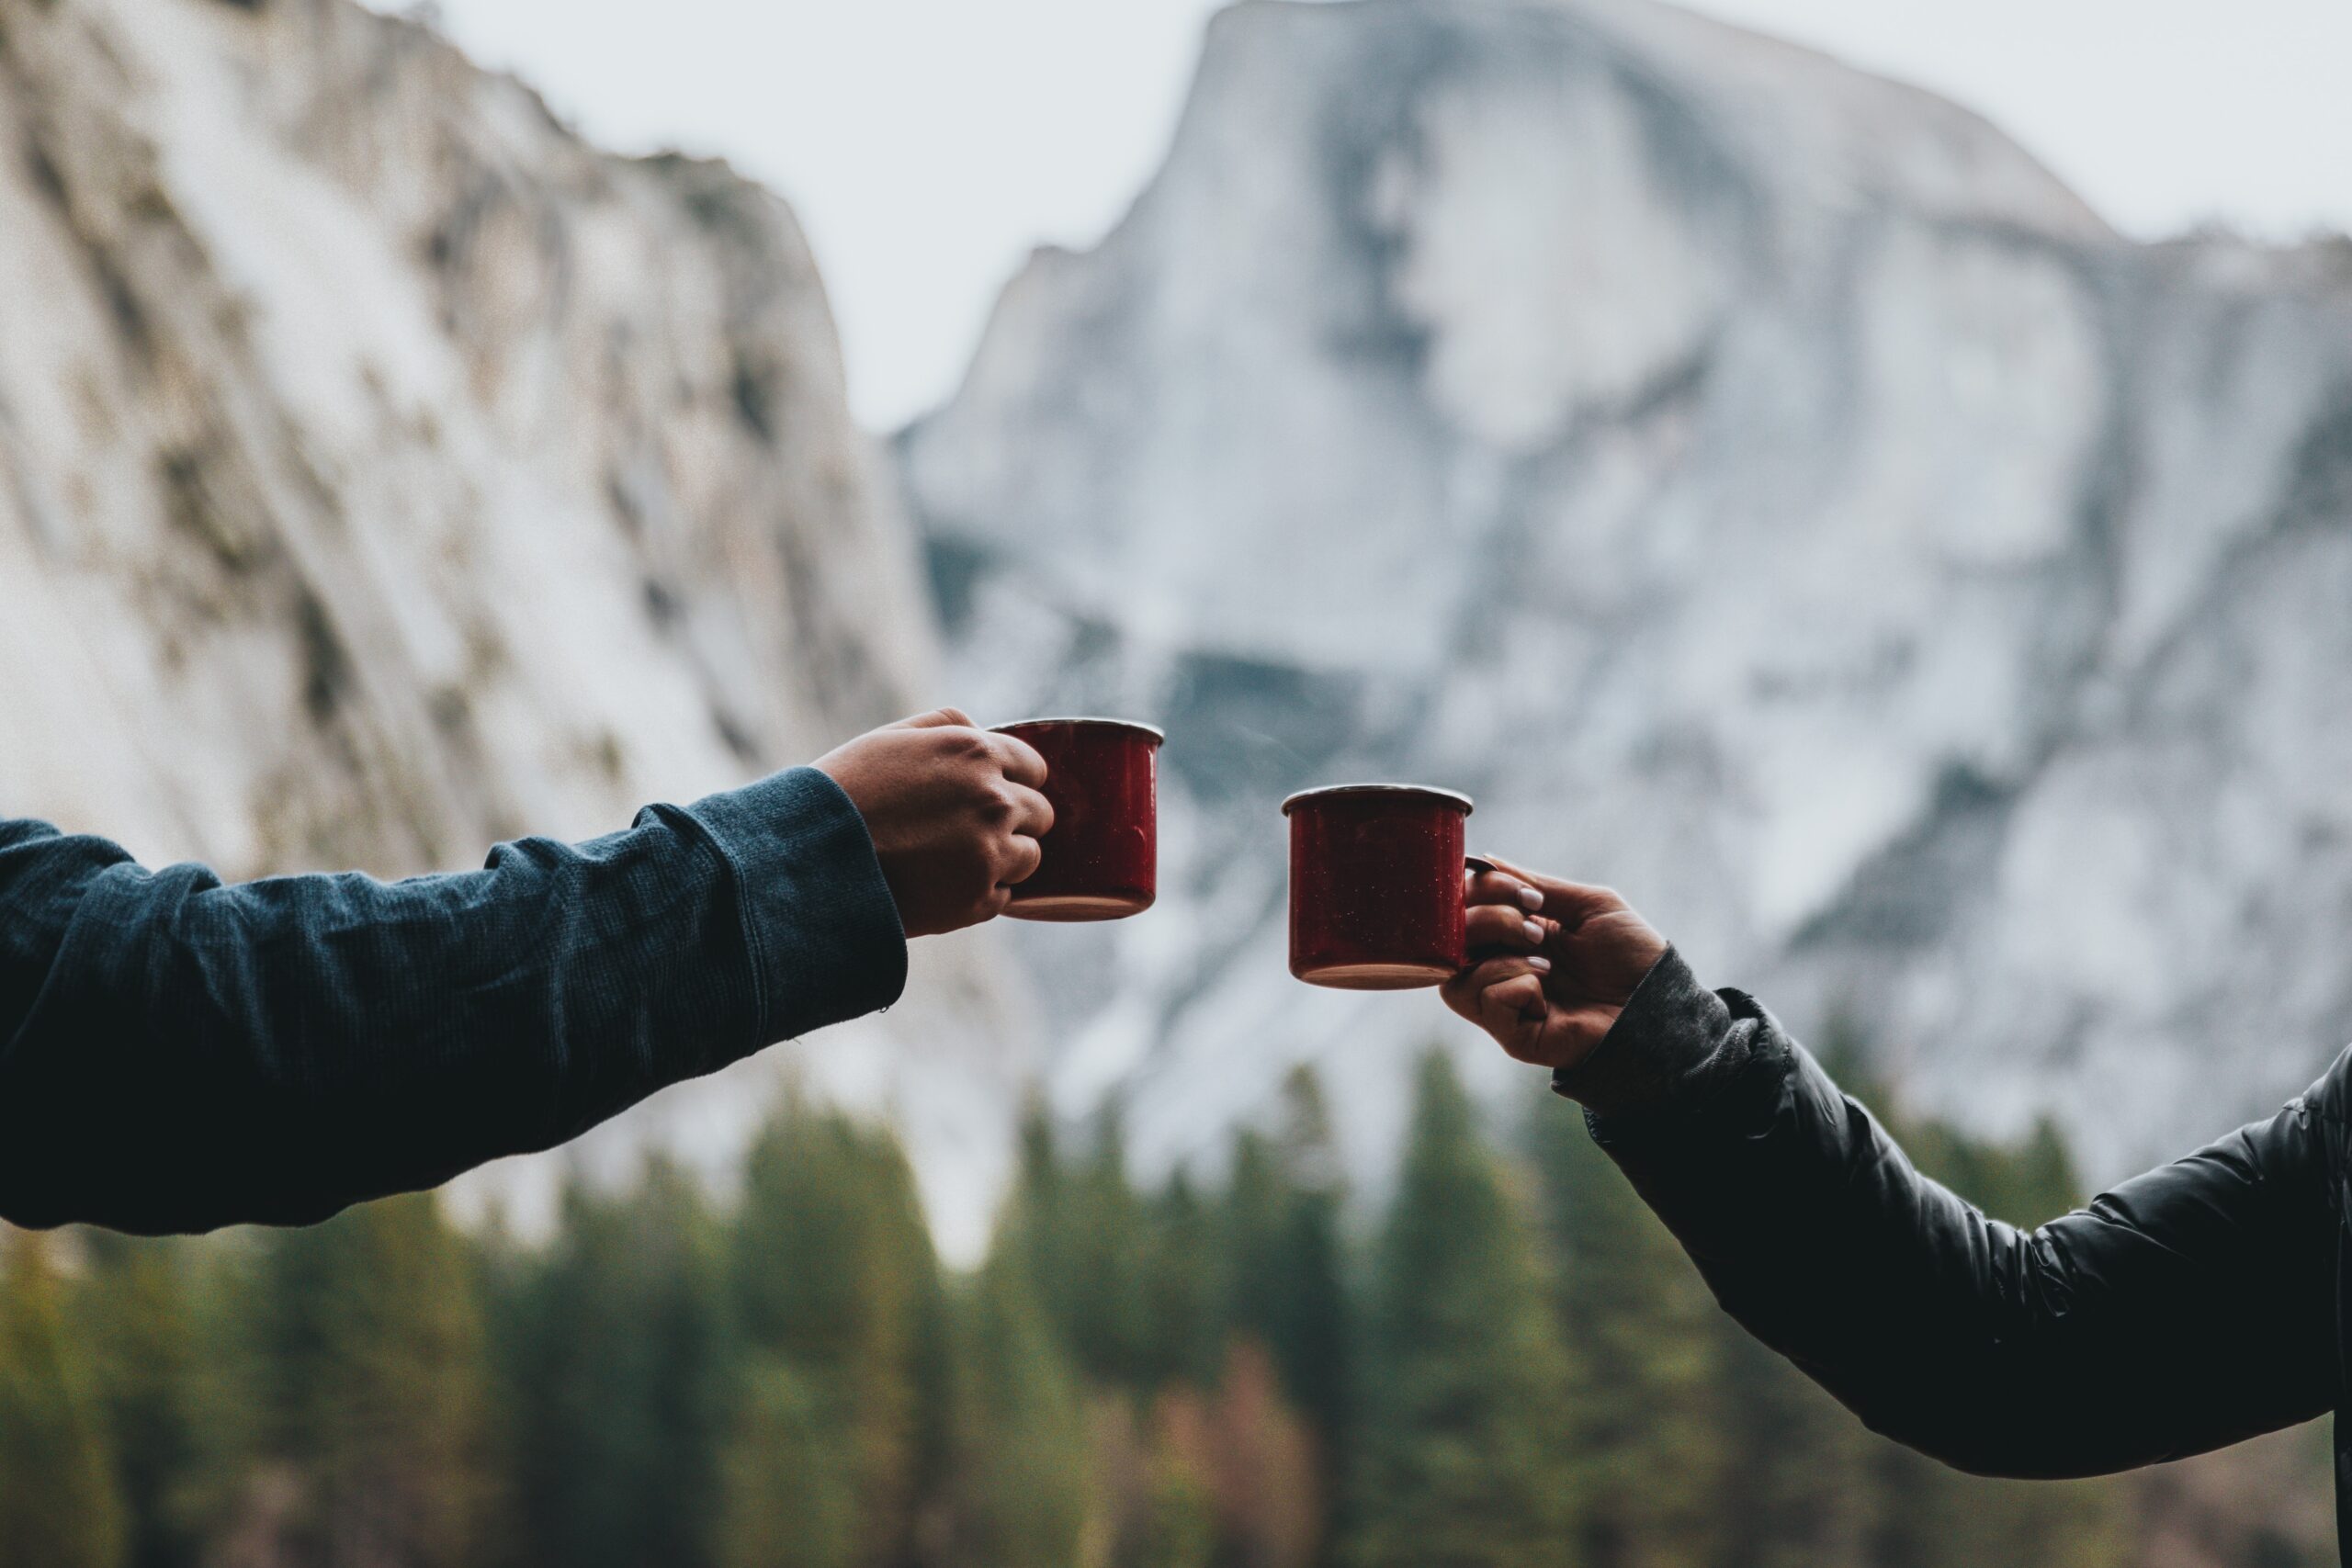 Two outstretched arms holding camping mugs